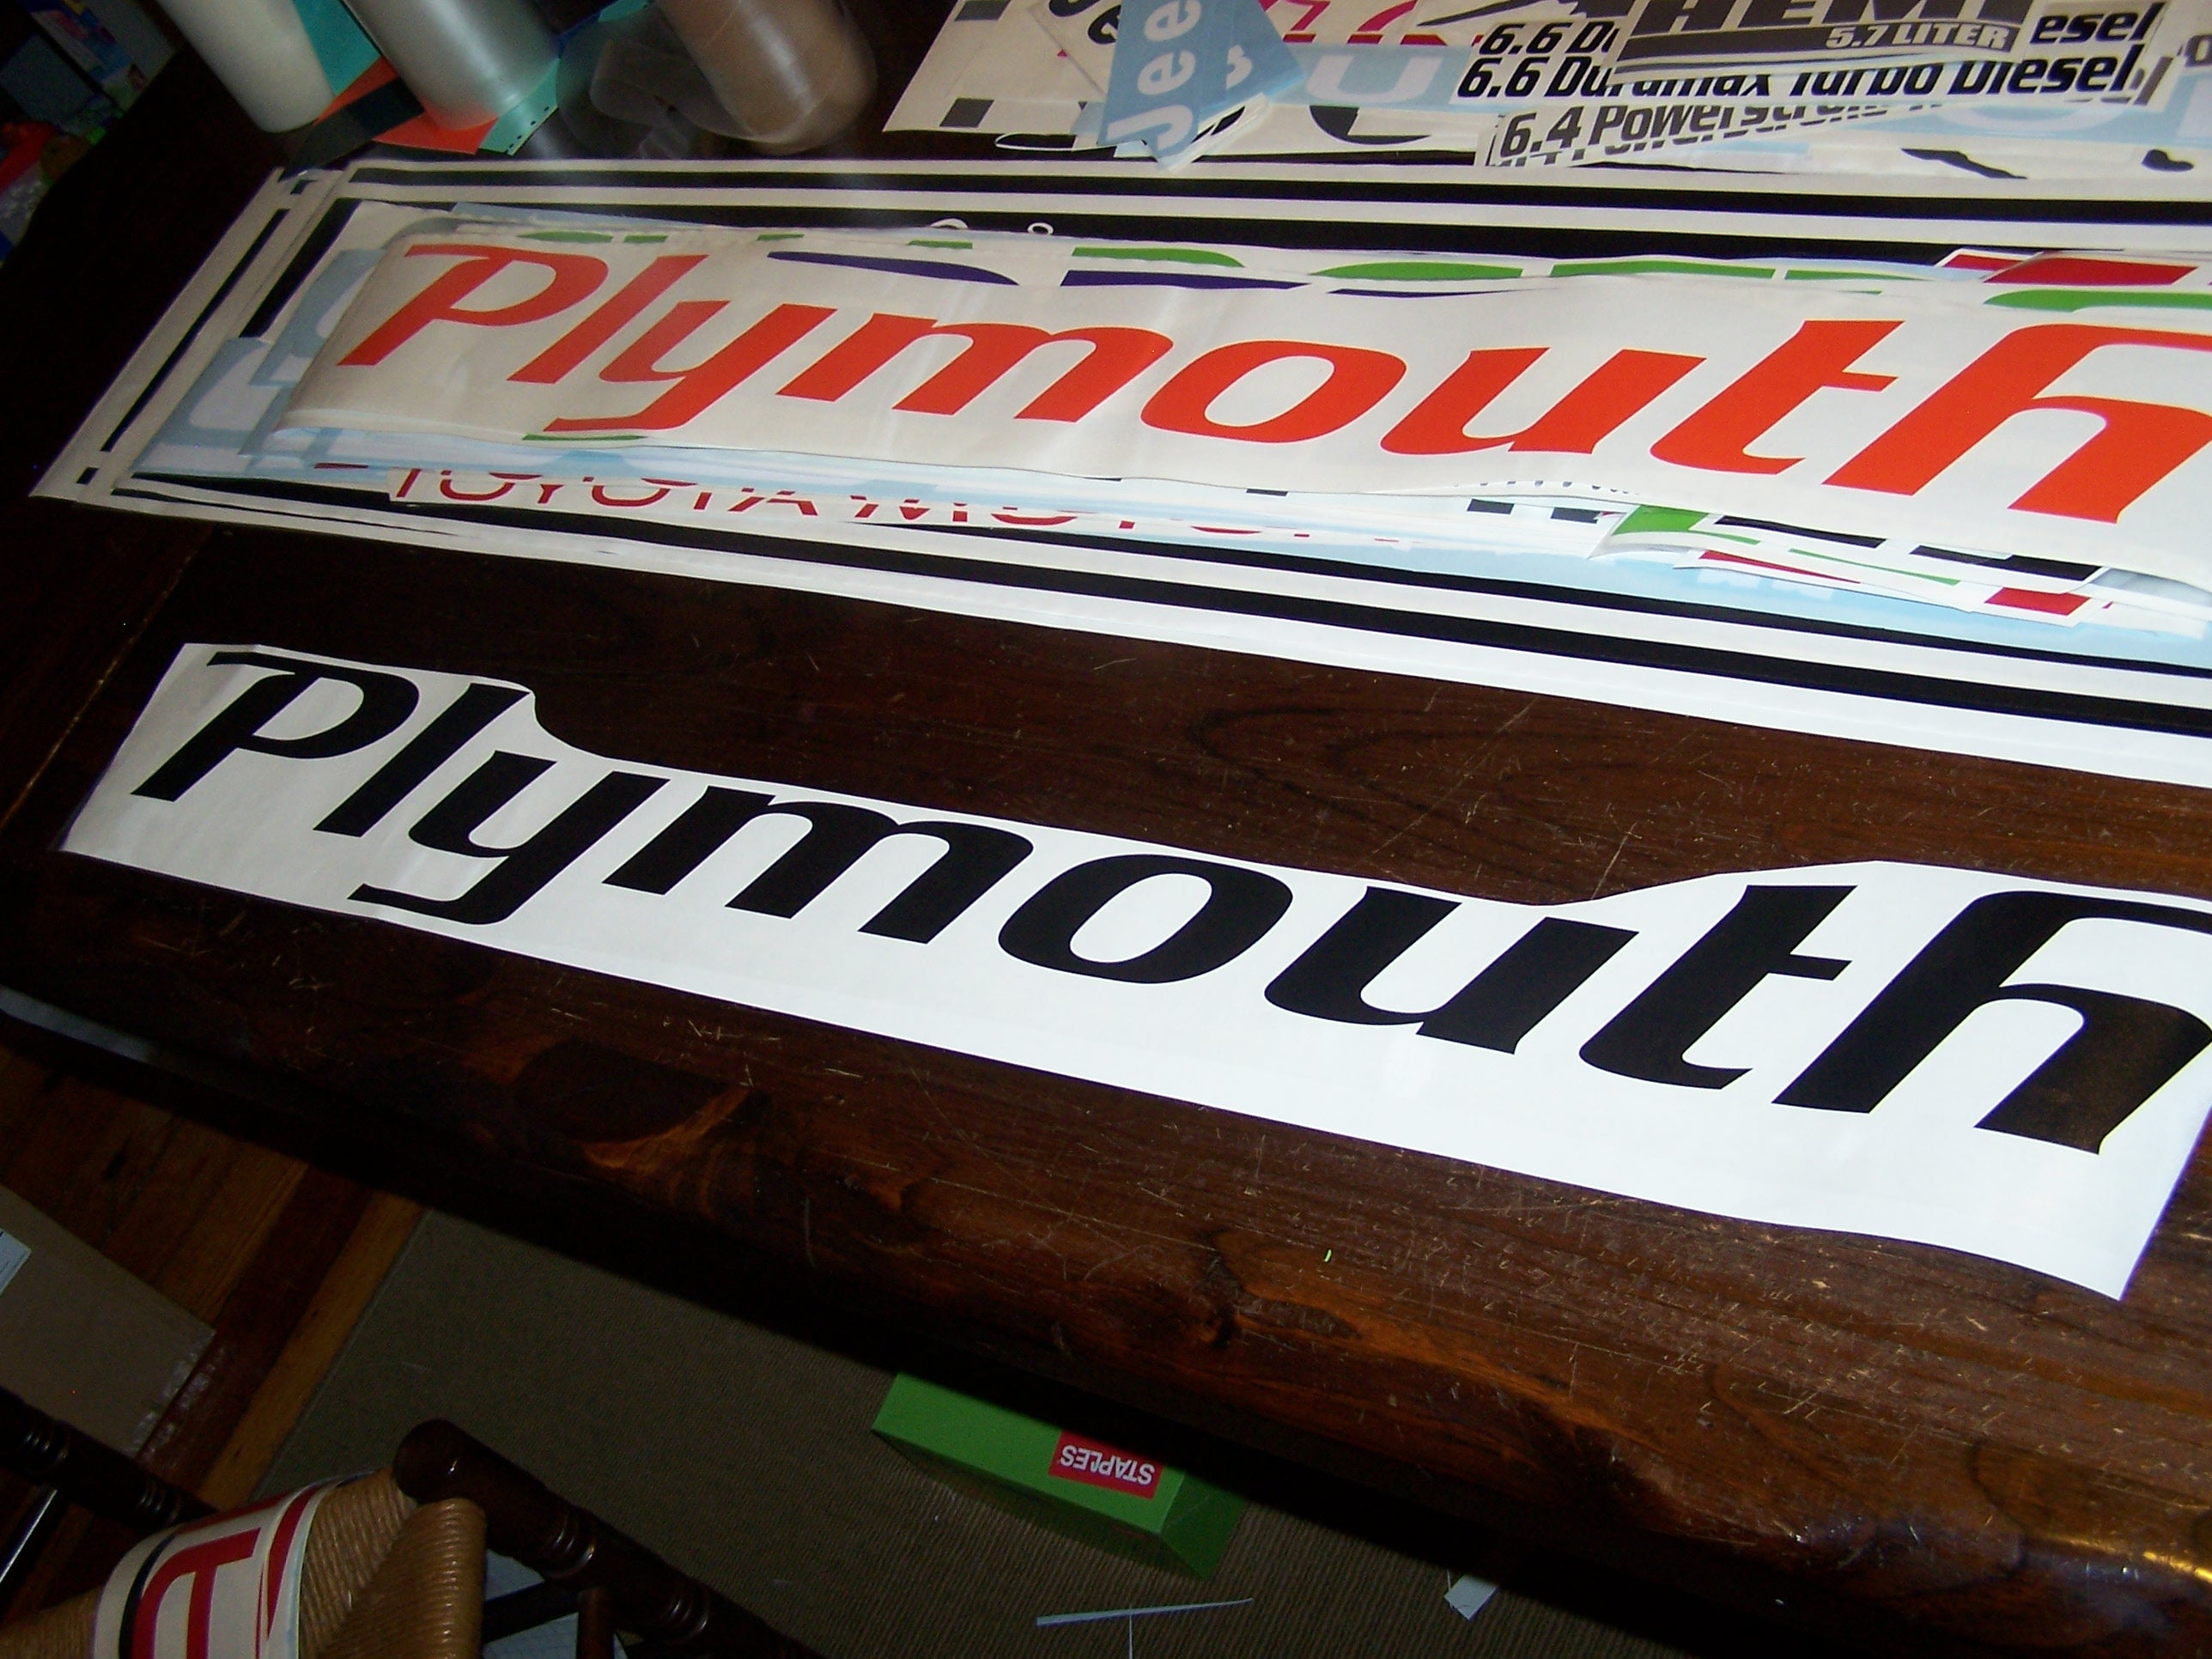 PLYMOUTH WINDSHIELD WINDOW VINYL DECAL STICKER CHOOSE COLOR & SIZE